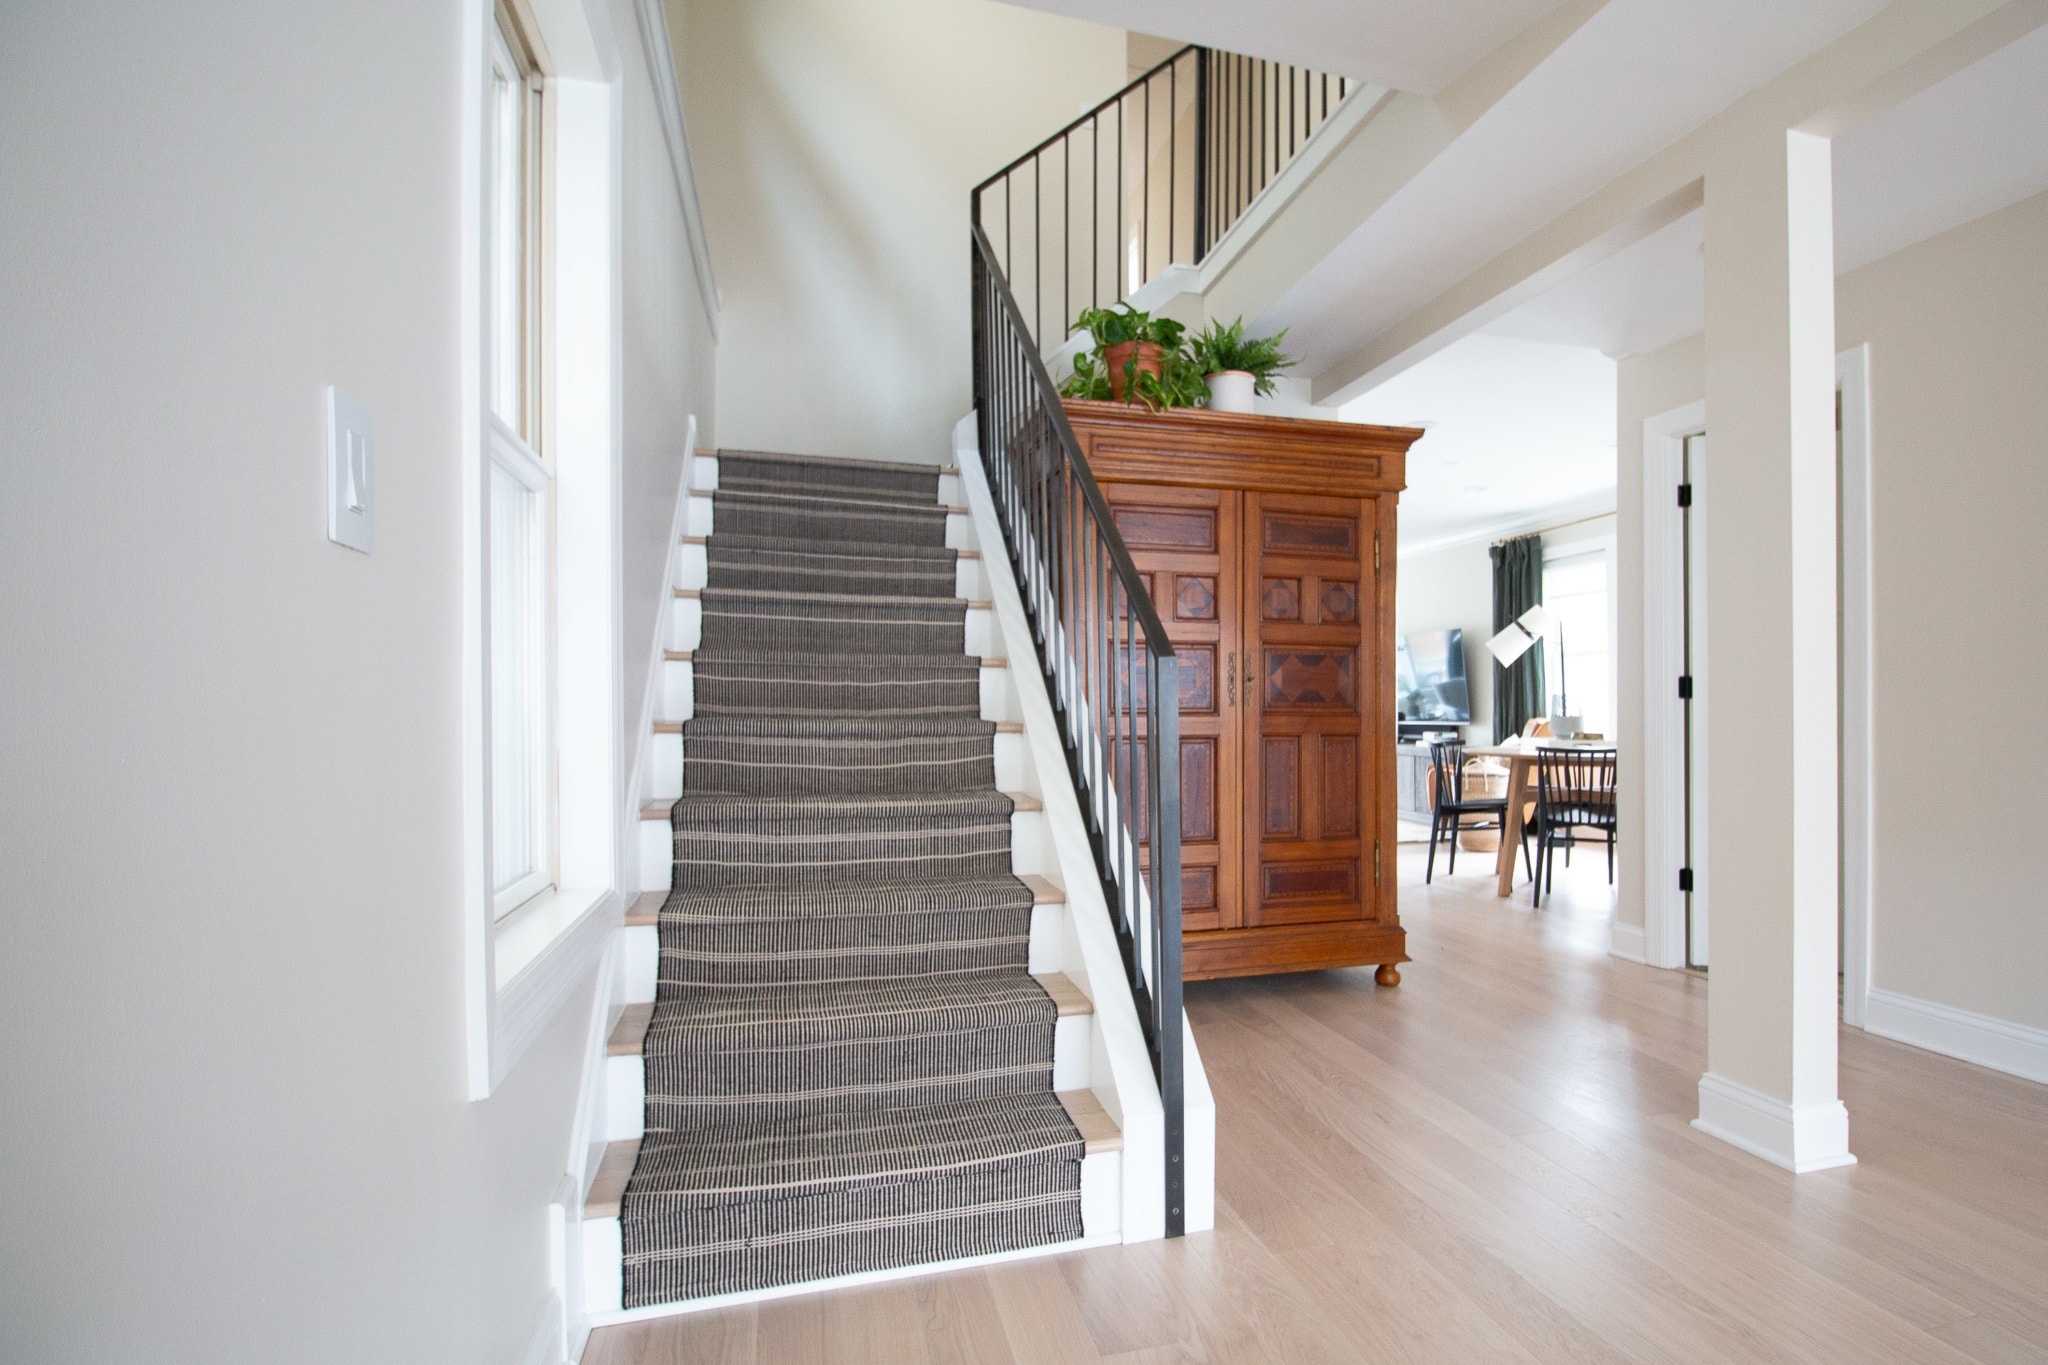 Tips to install a stair runner